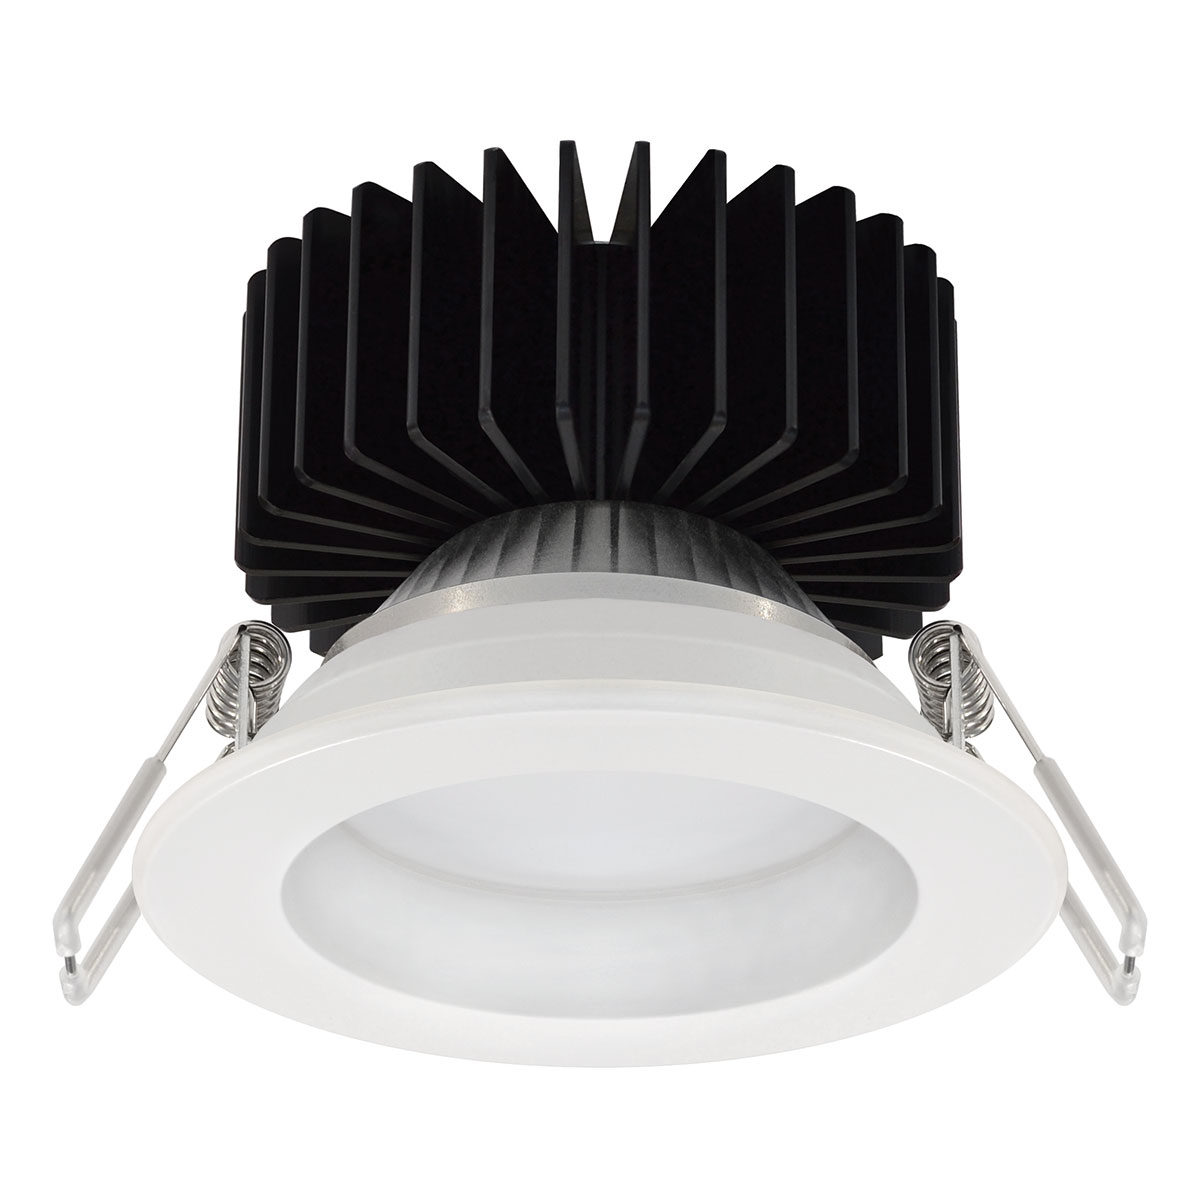 Kopa 7W Fixed Round Recessed LED Downlight IP65 80 Degree Diffused Black Trim